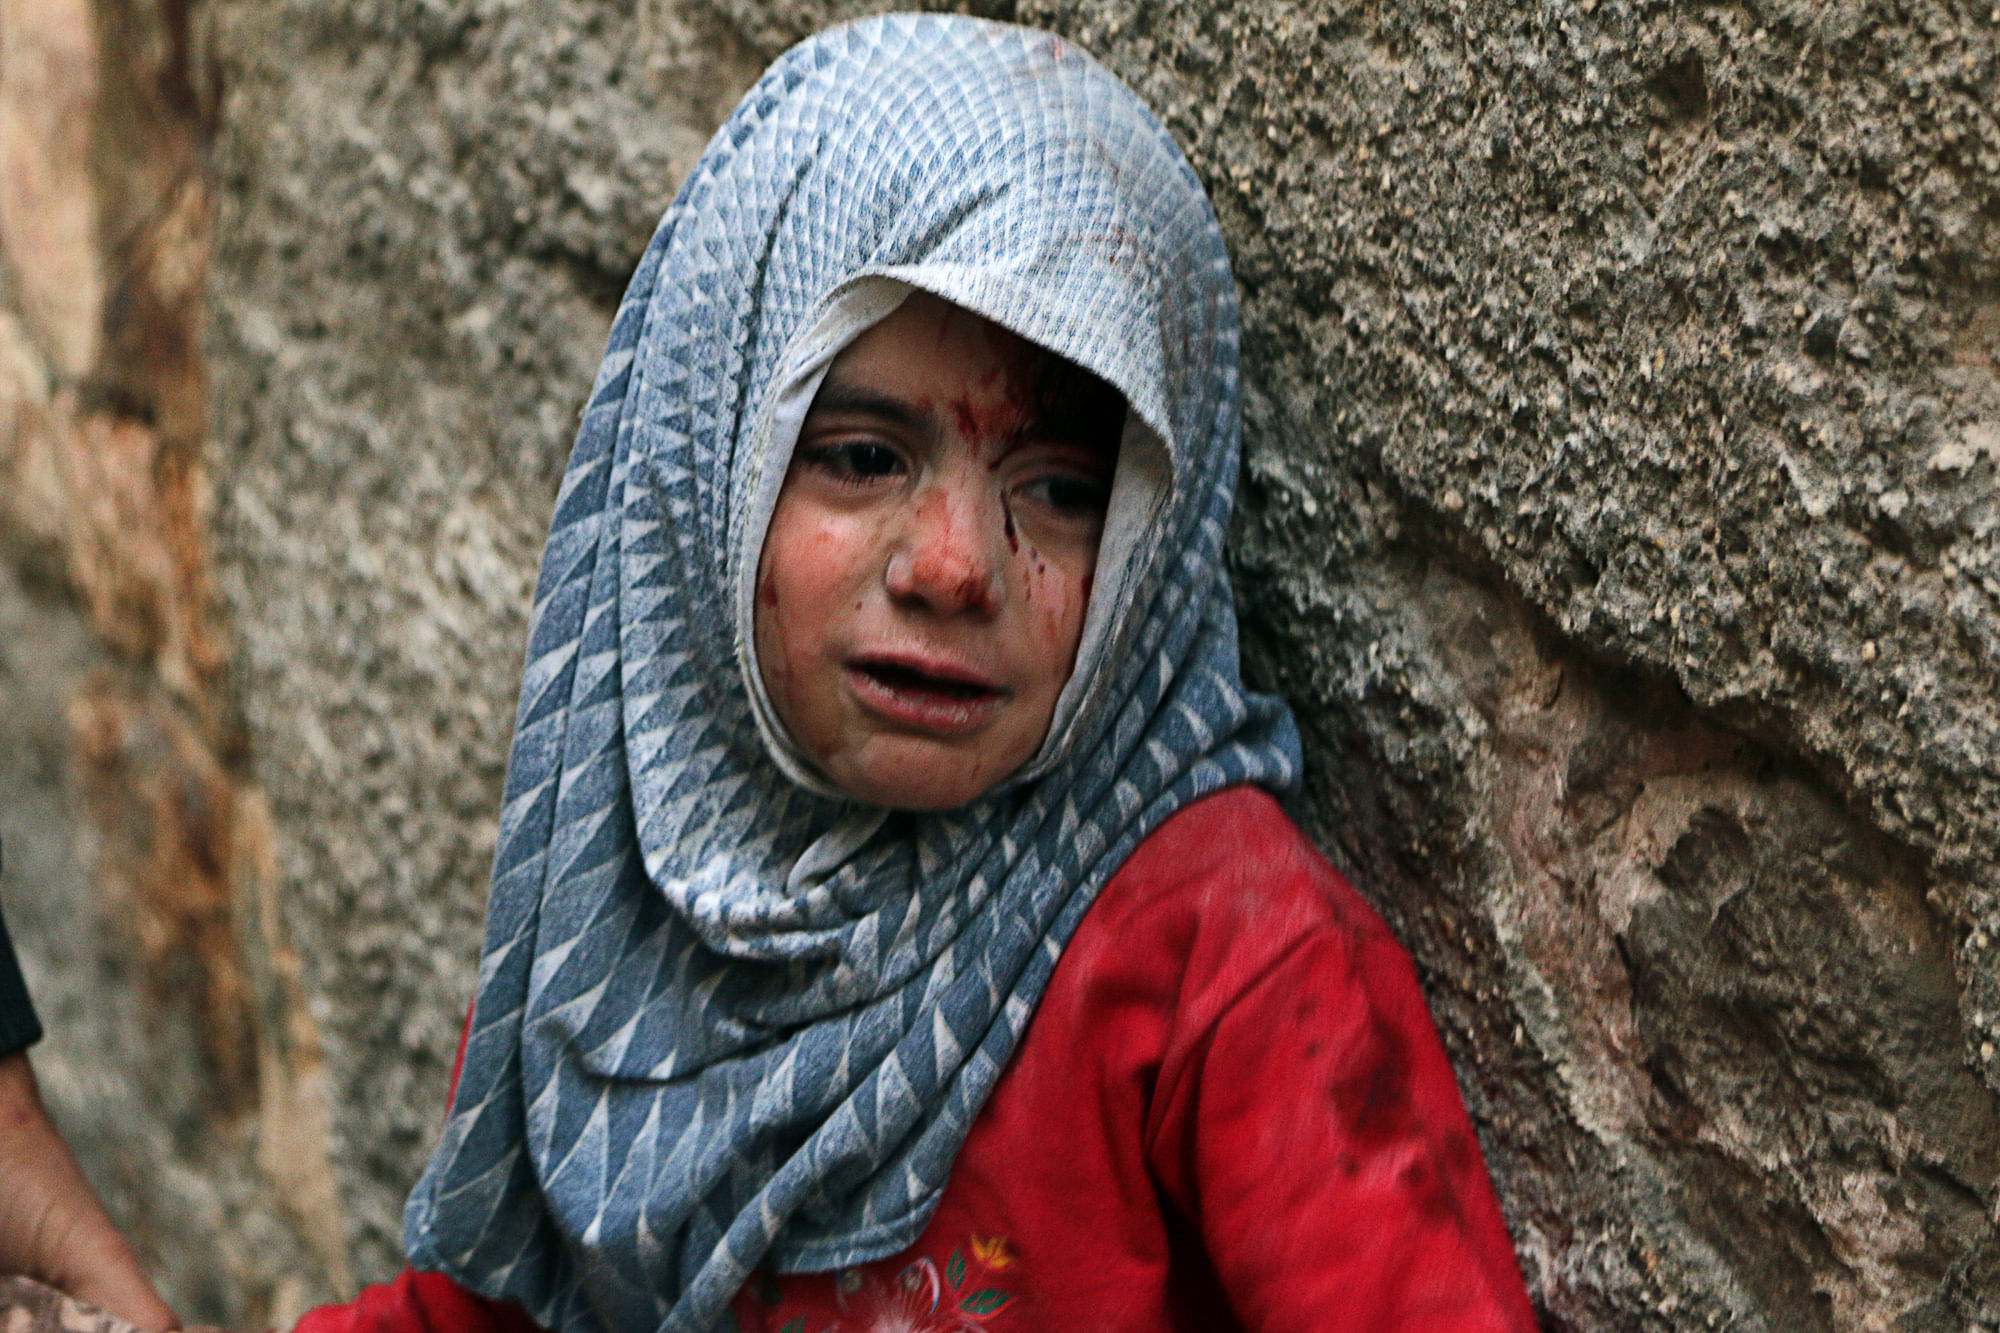 An injured girl reacts during what activists said were air strikes by forces loyal to Syria’s President Bashar Al-Assad, in the Bab al-Hadid district of Aleppo, November 30, 2014. (Photo: Reuters)